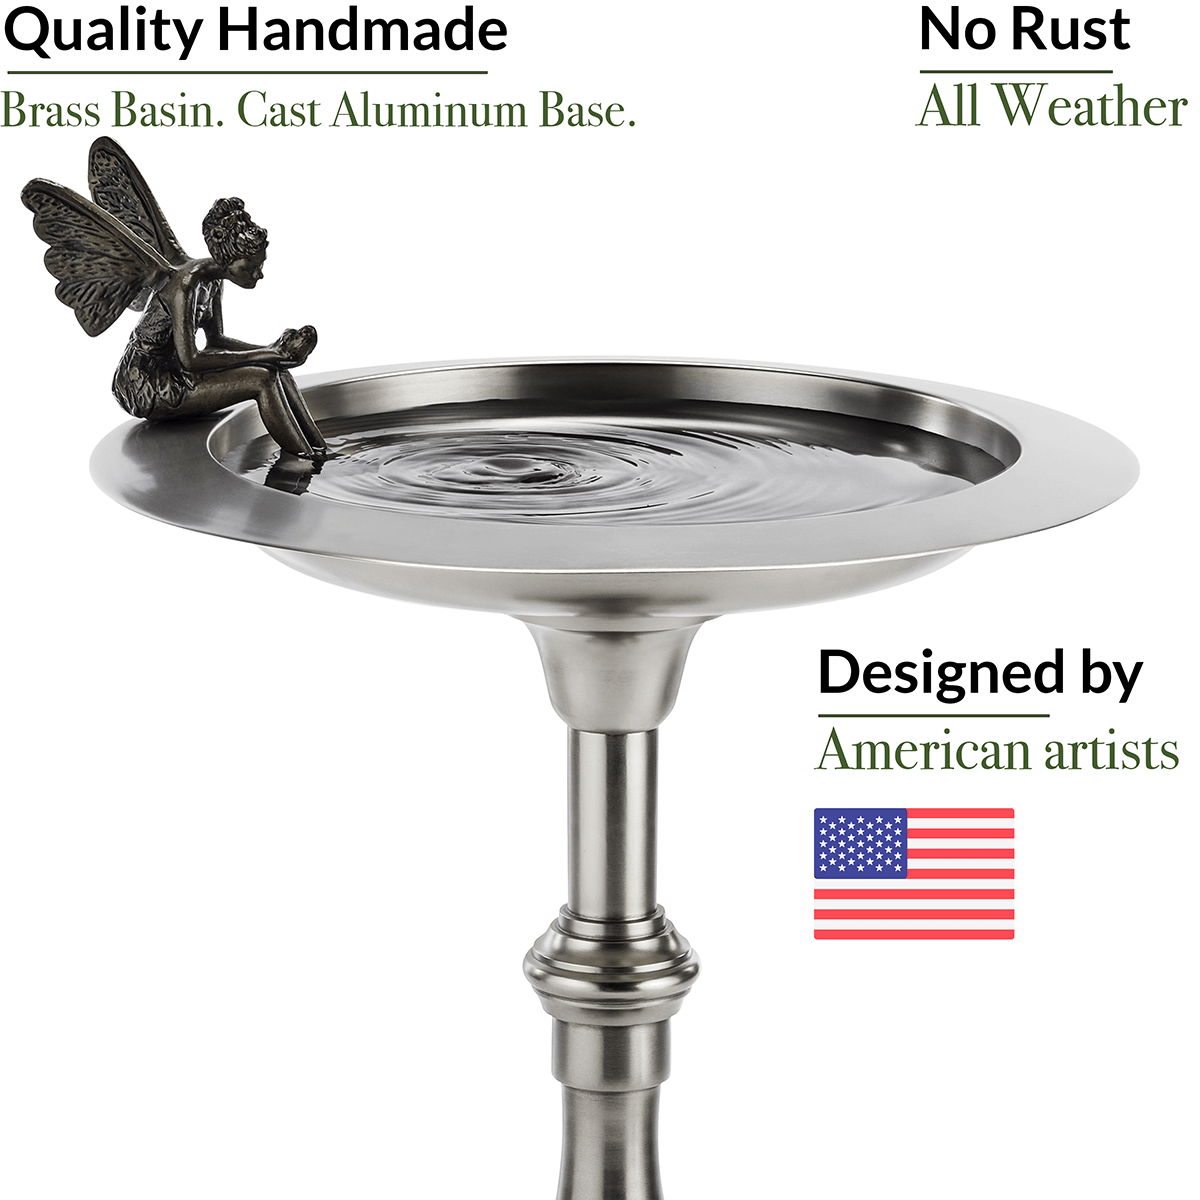 Classic Pewter Bird Bath Pedestal with Fairy - Good Directions